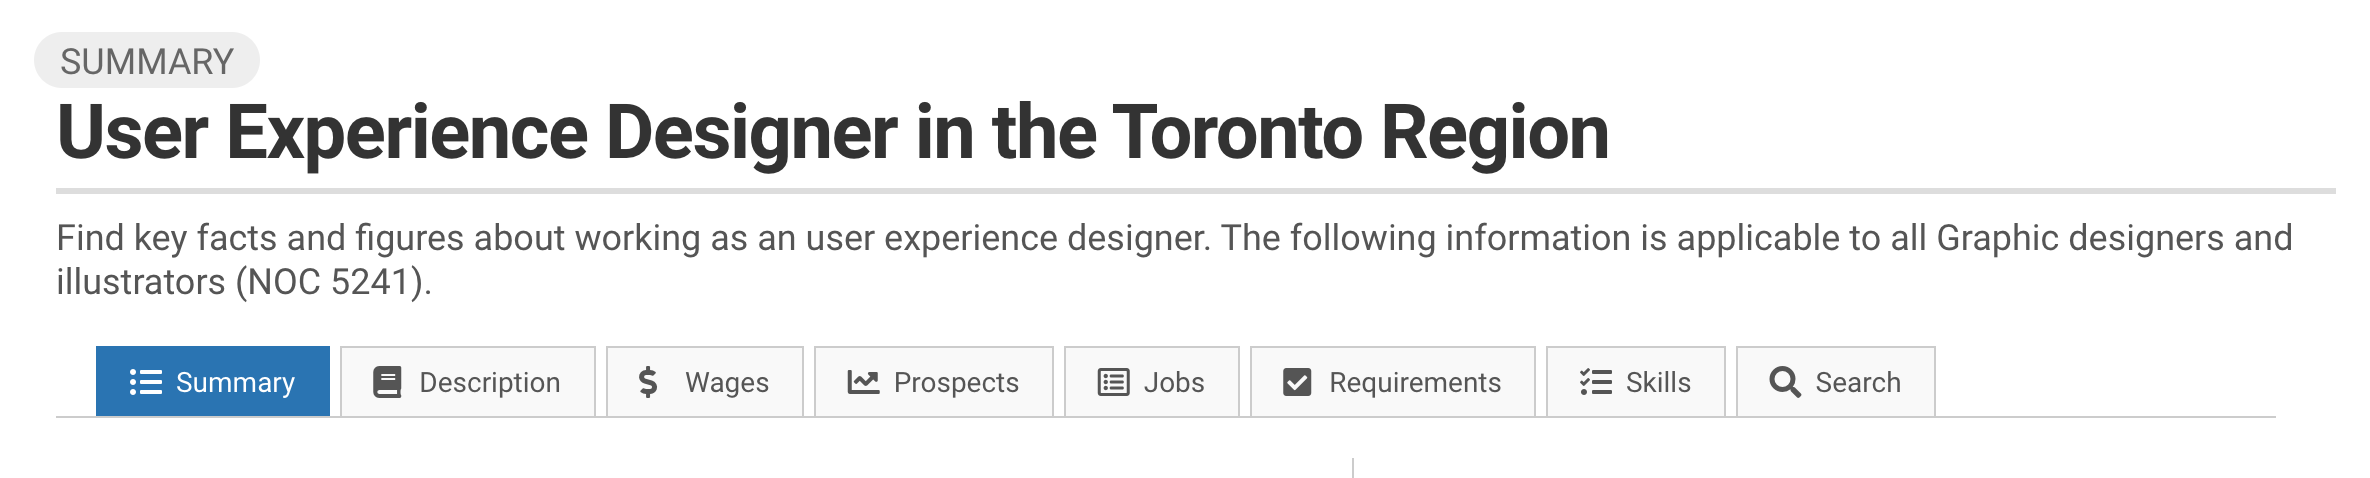 Image showing how to see StatCan trends for UX designers near Toronto or other cities